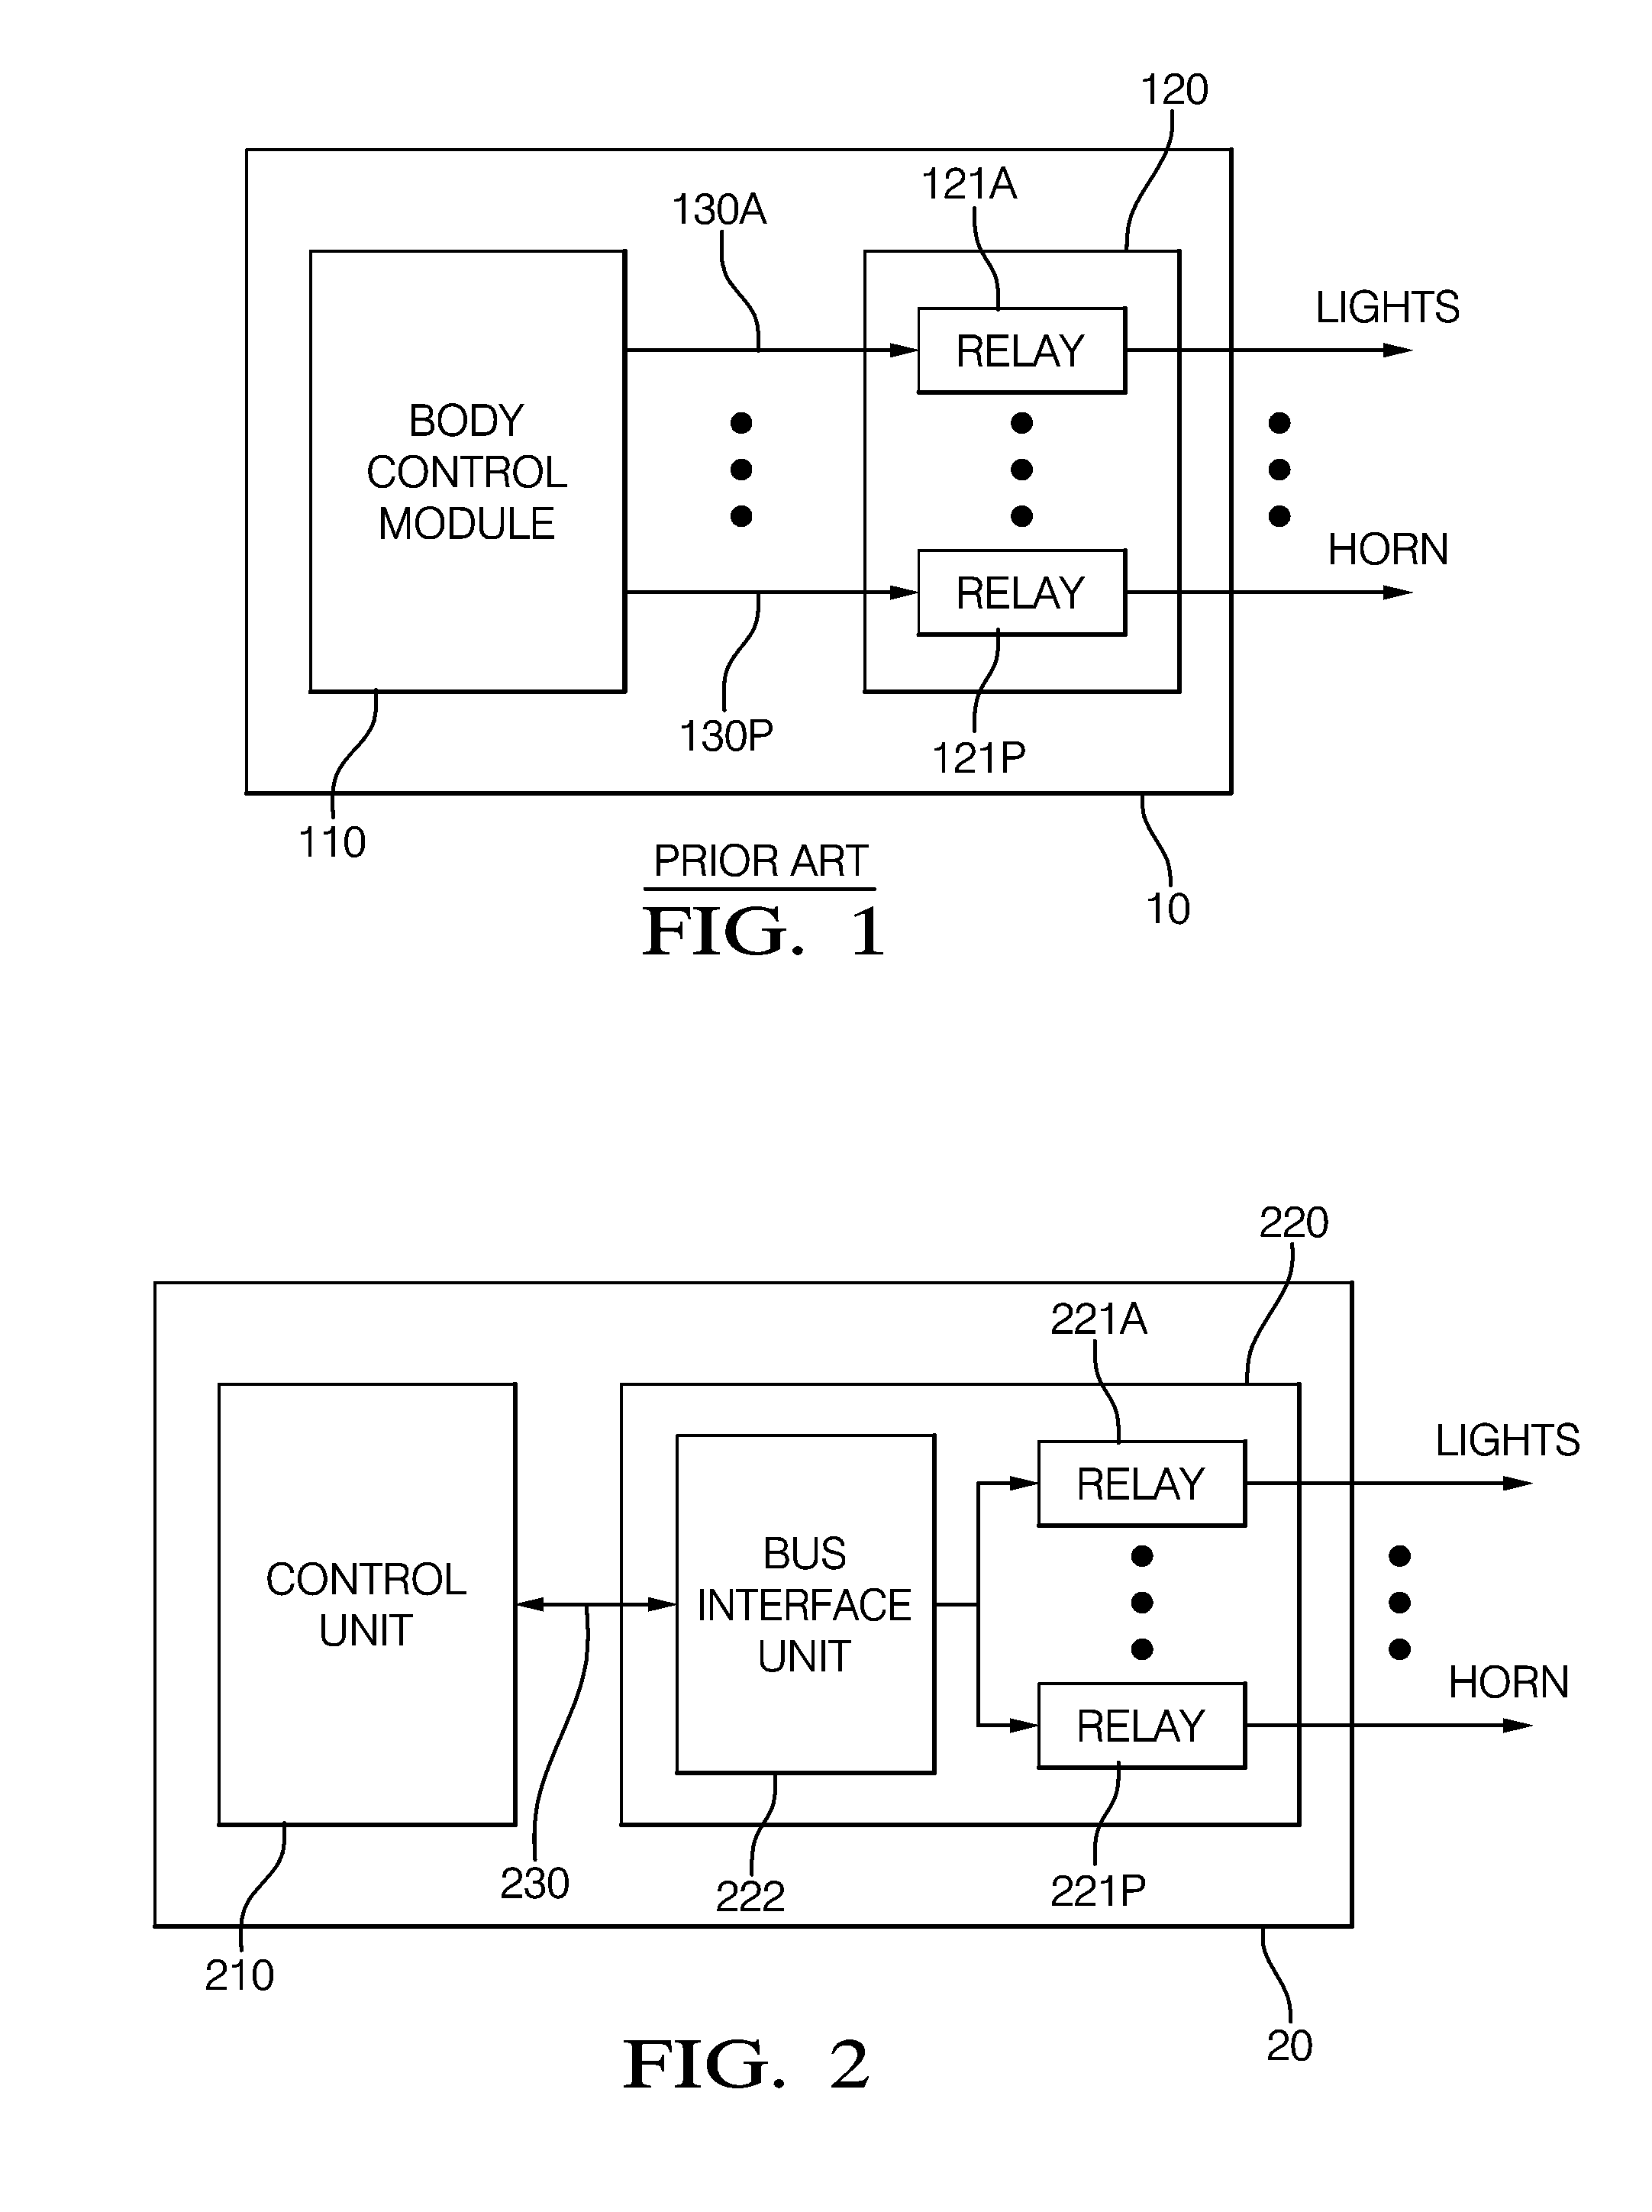 Electrical and electronic system having an electrical center for a vehicle